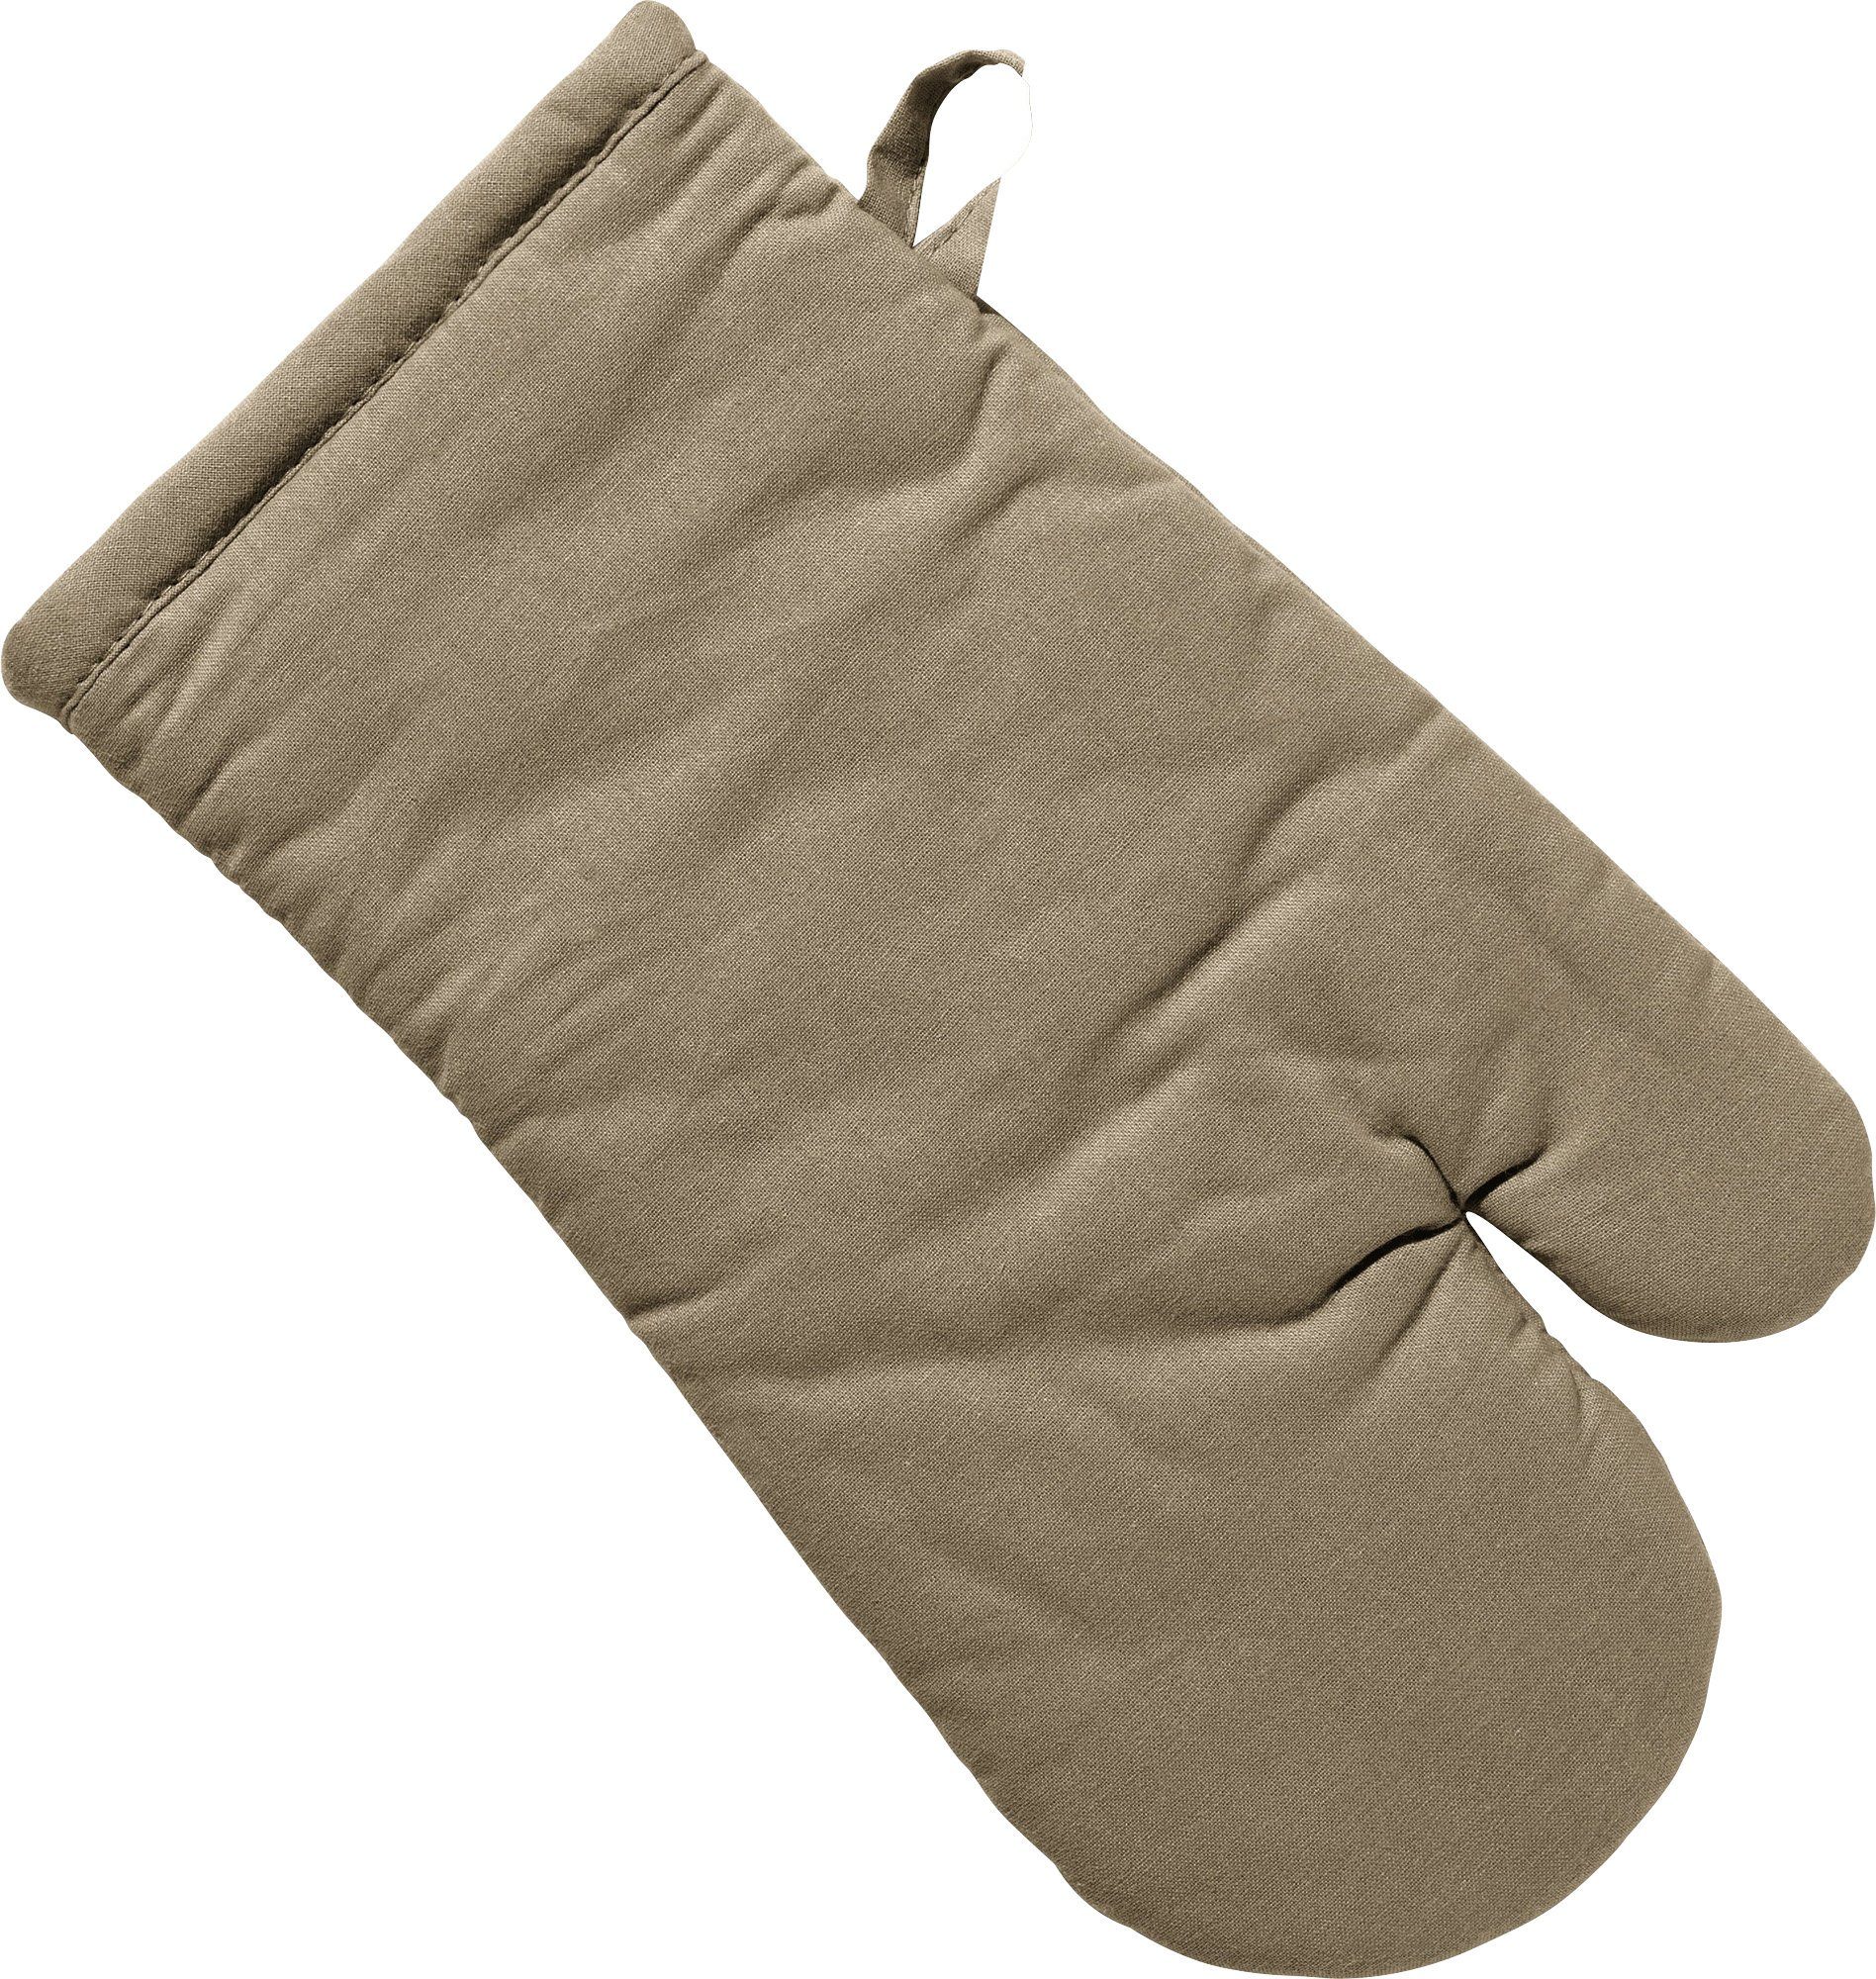 (1-tlg), REDBEST Topflappen Ofenhandschuh taupe Uni "Seattle",